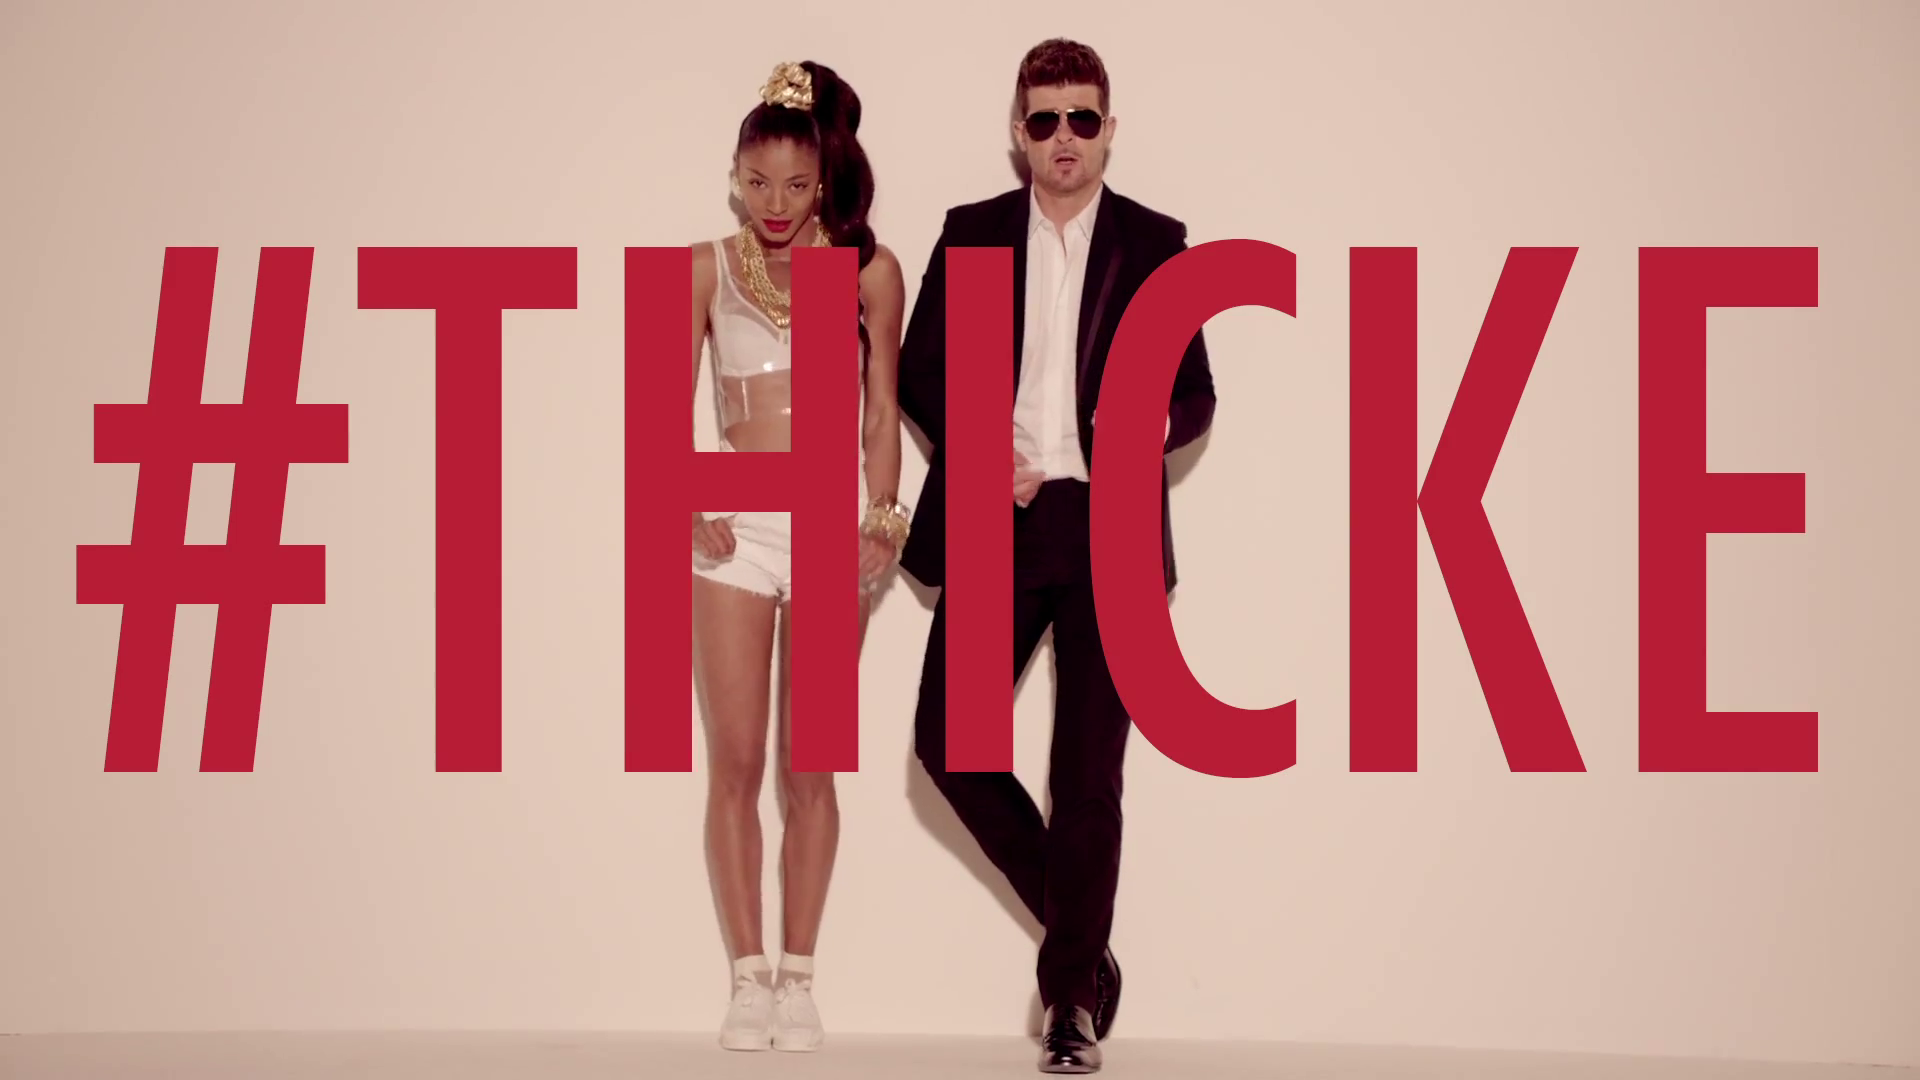 T me at t swaps. Robin Thicke blurred lines. Robin Thicke blurred lines ft. T.I., Pharrell. Robin Thicke личная жизнь. Pharrell Williams and Robin Thicke.